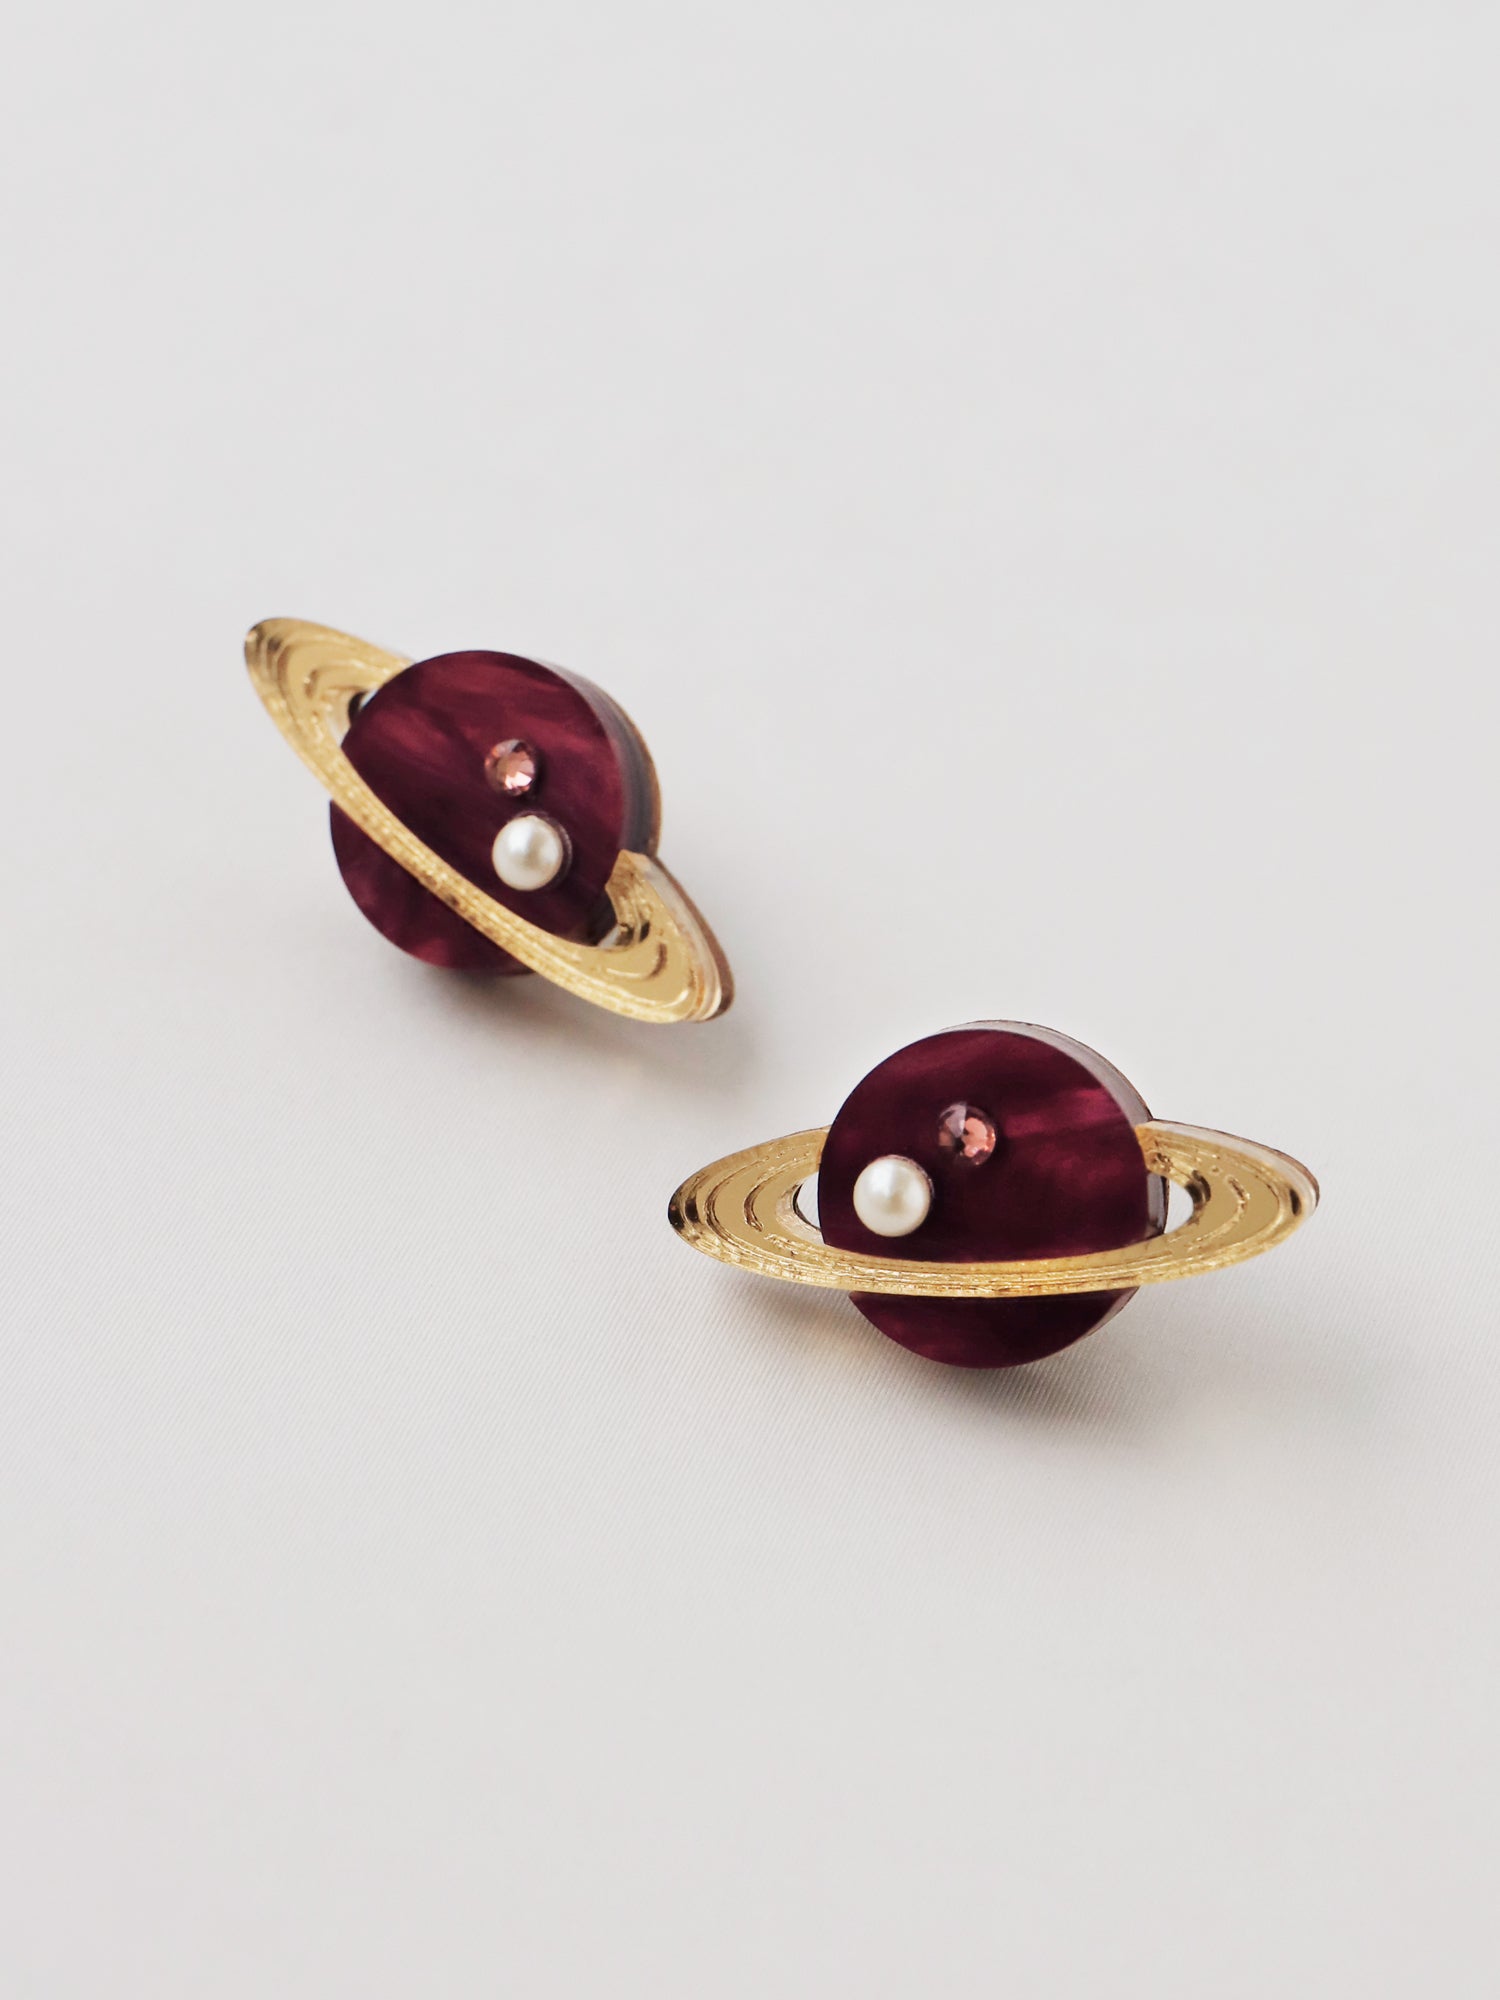 Saturn studs in pearlescent cherry acrylic, embellished with high quality glass pearls & crystals. Handmade in London by Wolf & Moon.